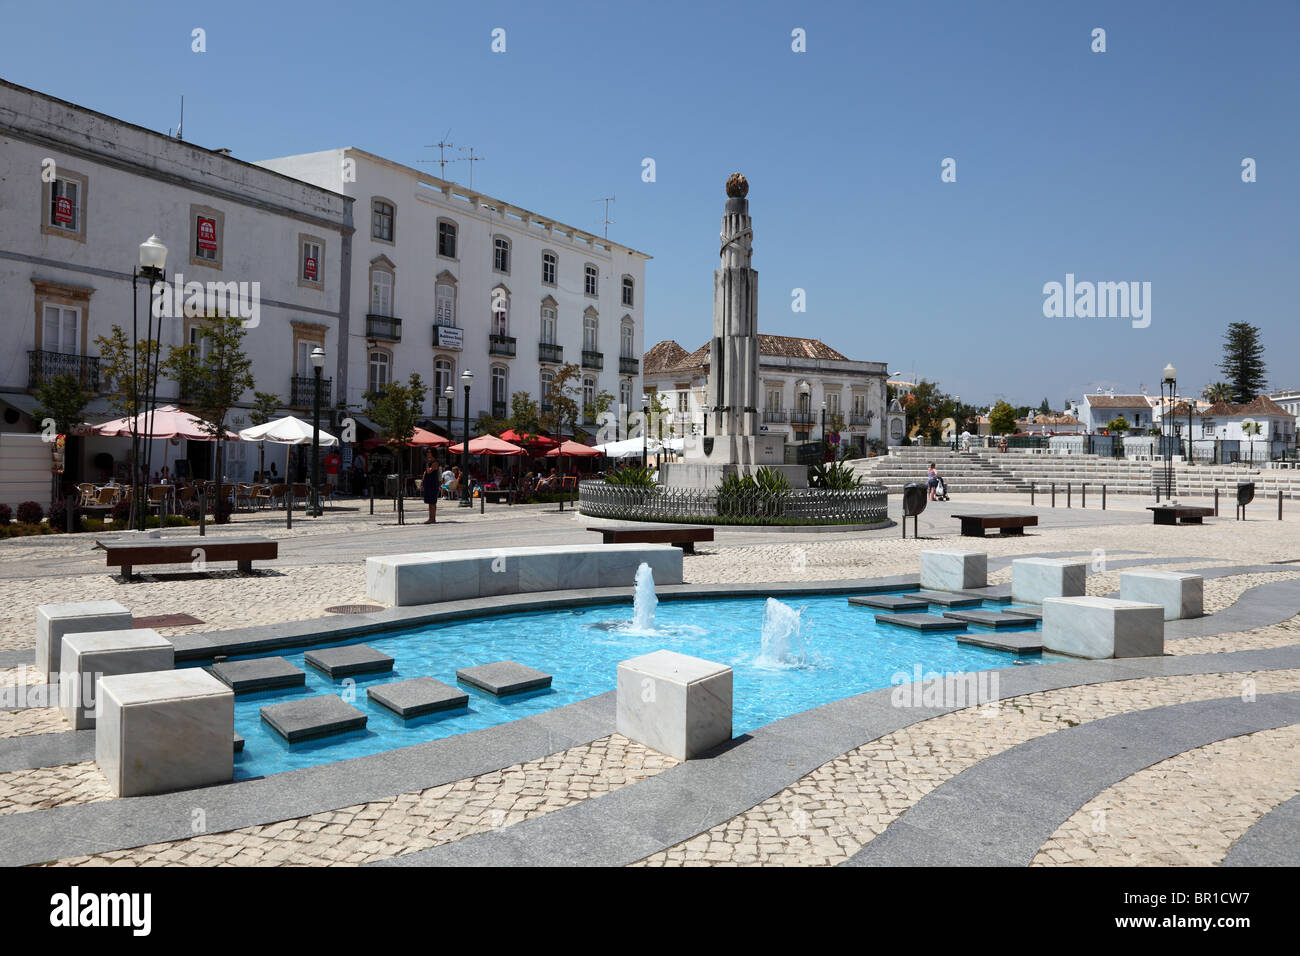 Square in the old town of Tavira, Portugal Stock Photo